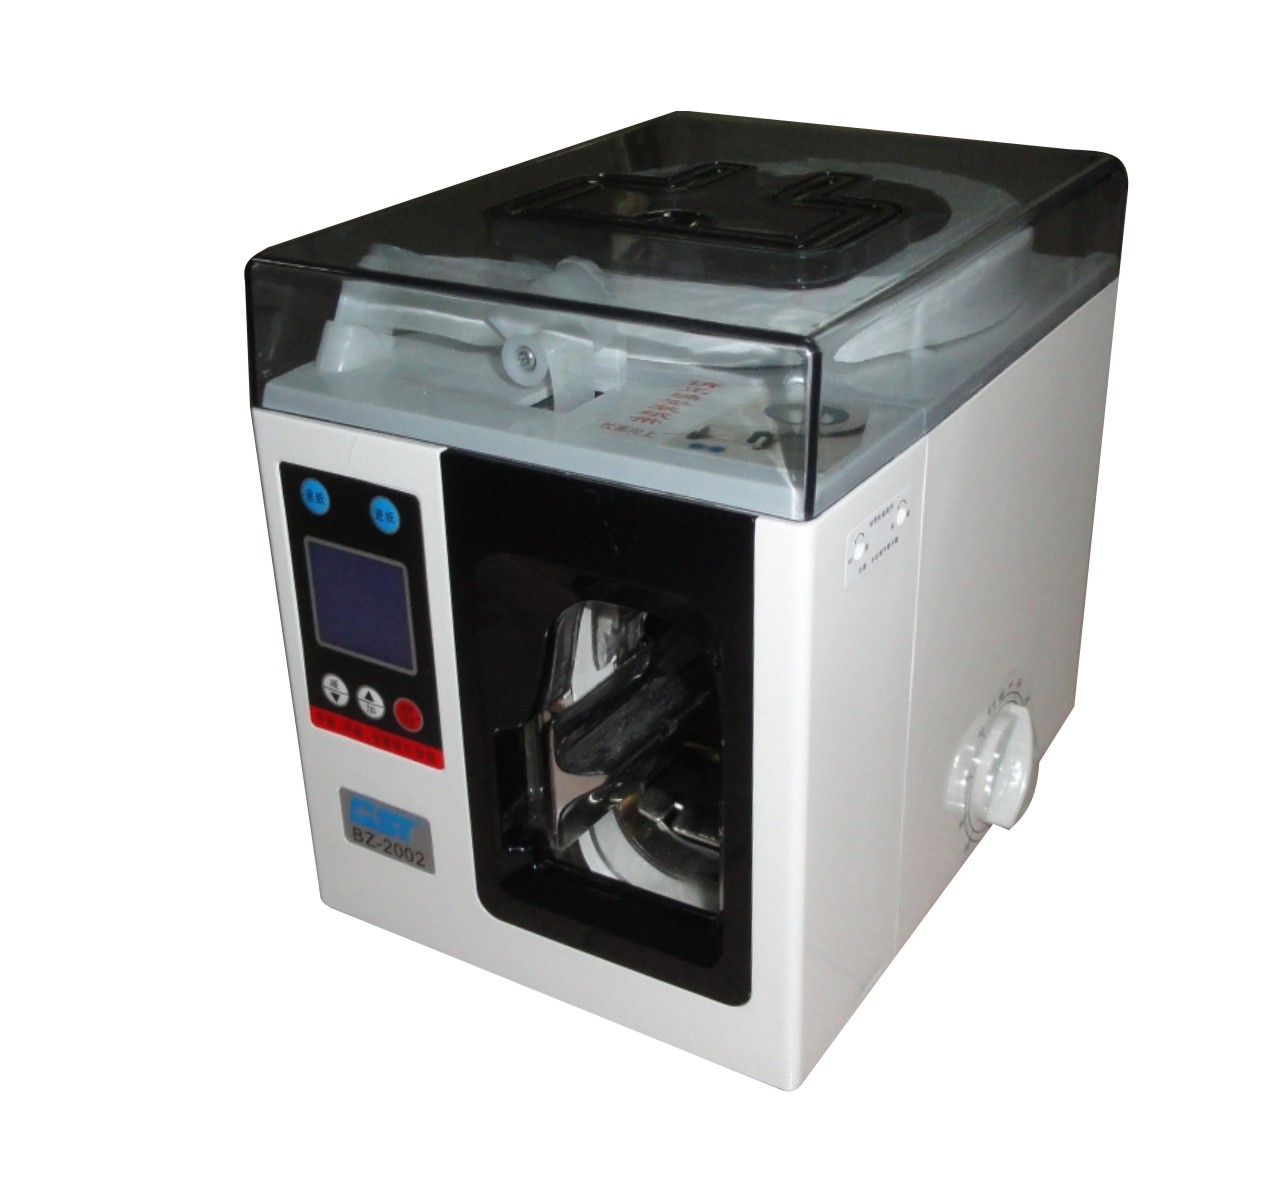 DC 24V Heavy-Duty Money Strapping Machine With Microcomputer Control